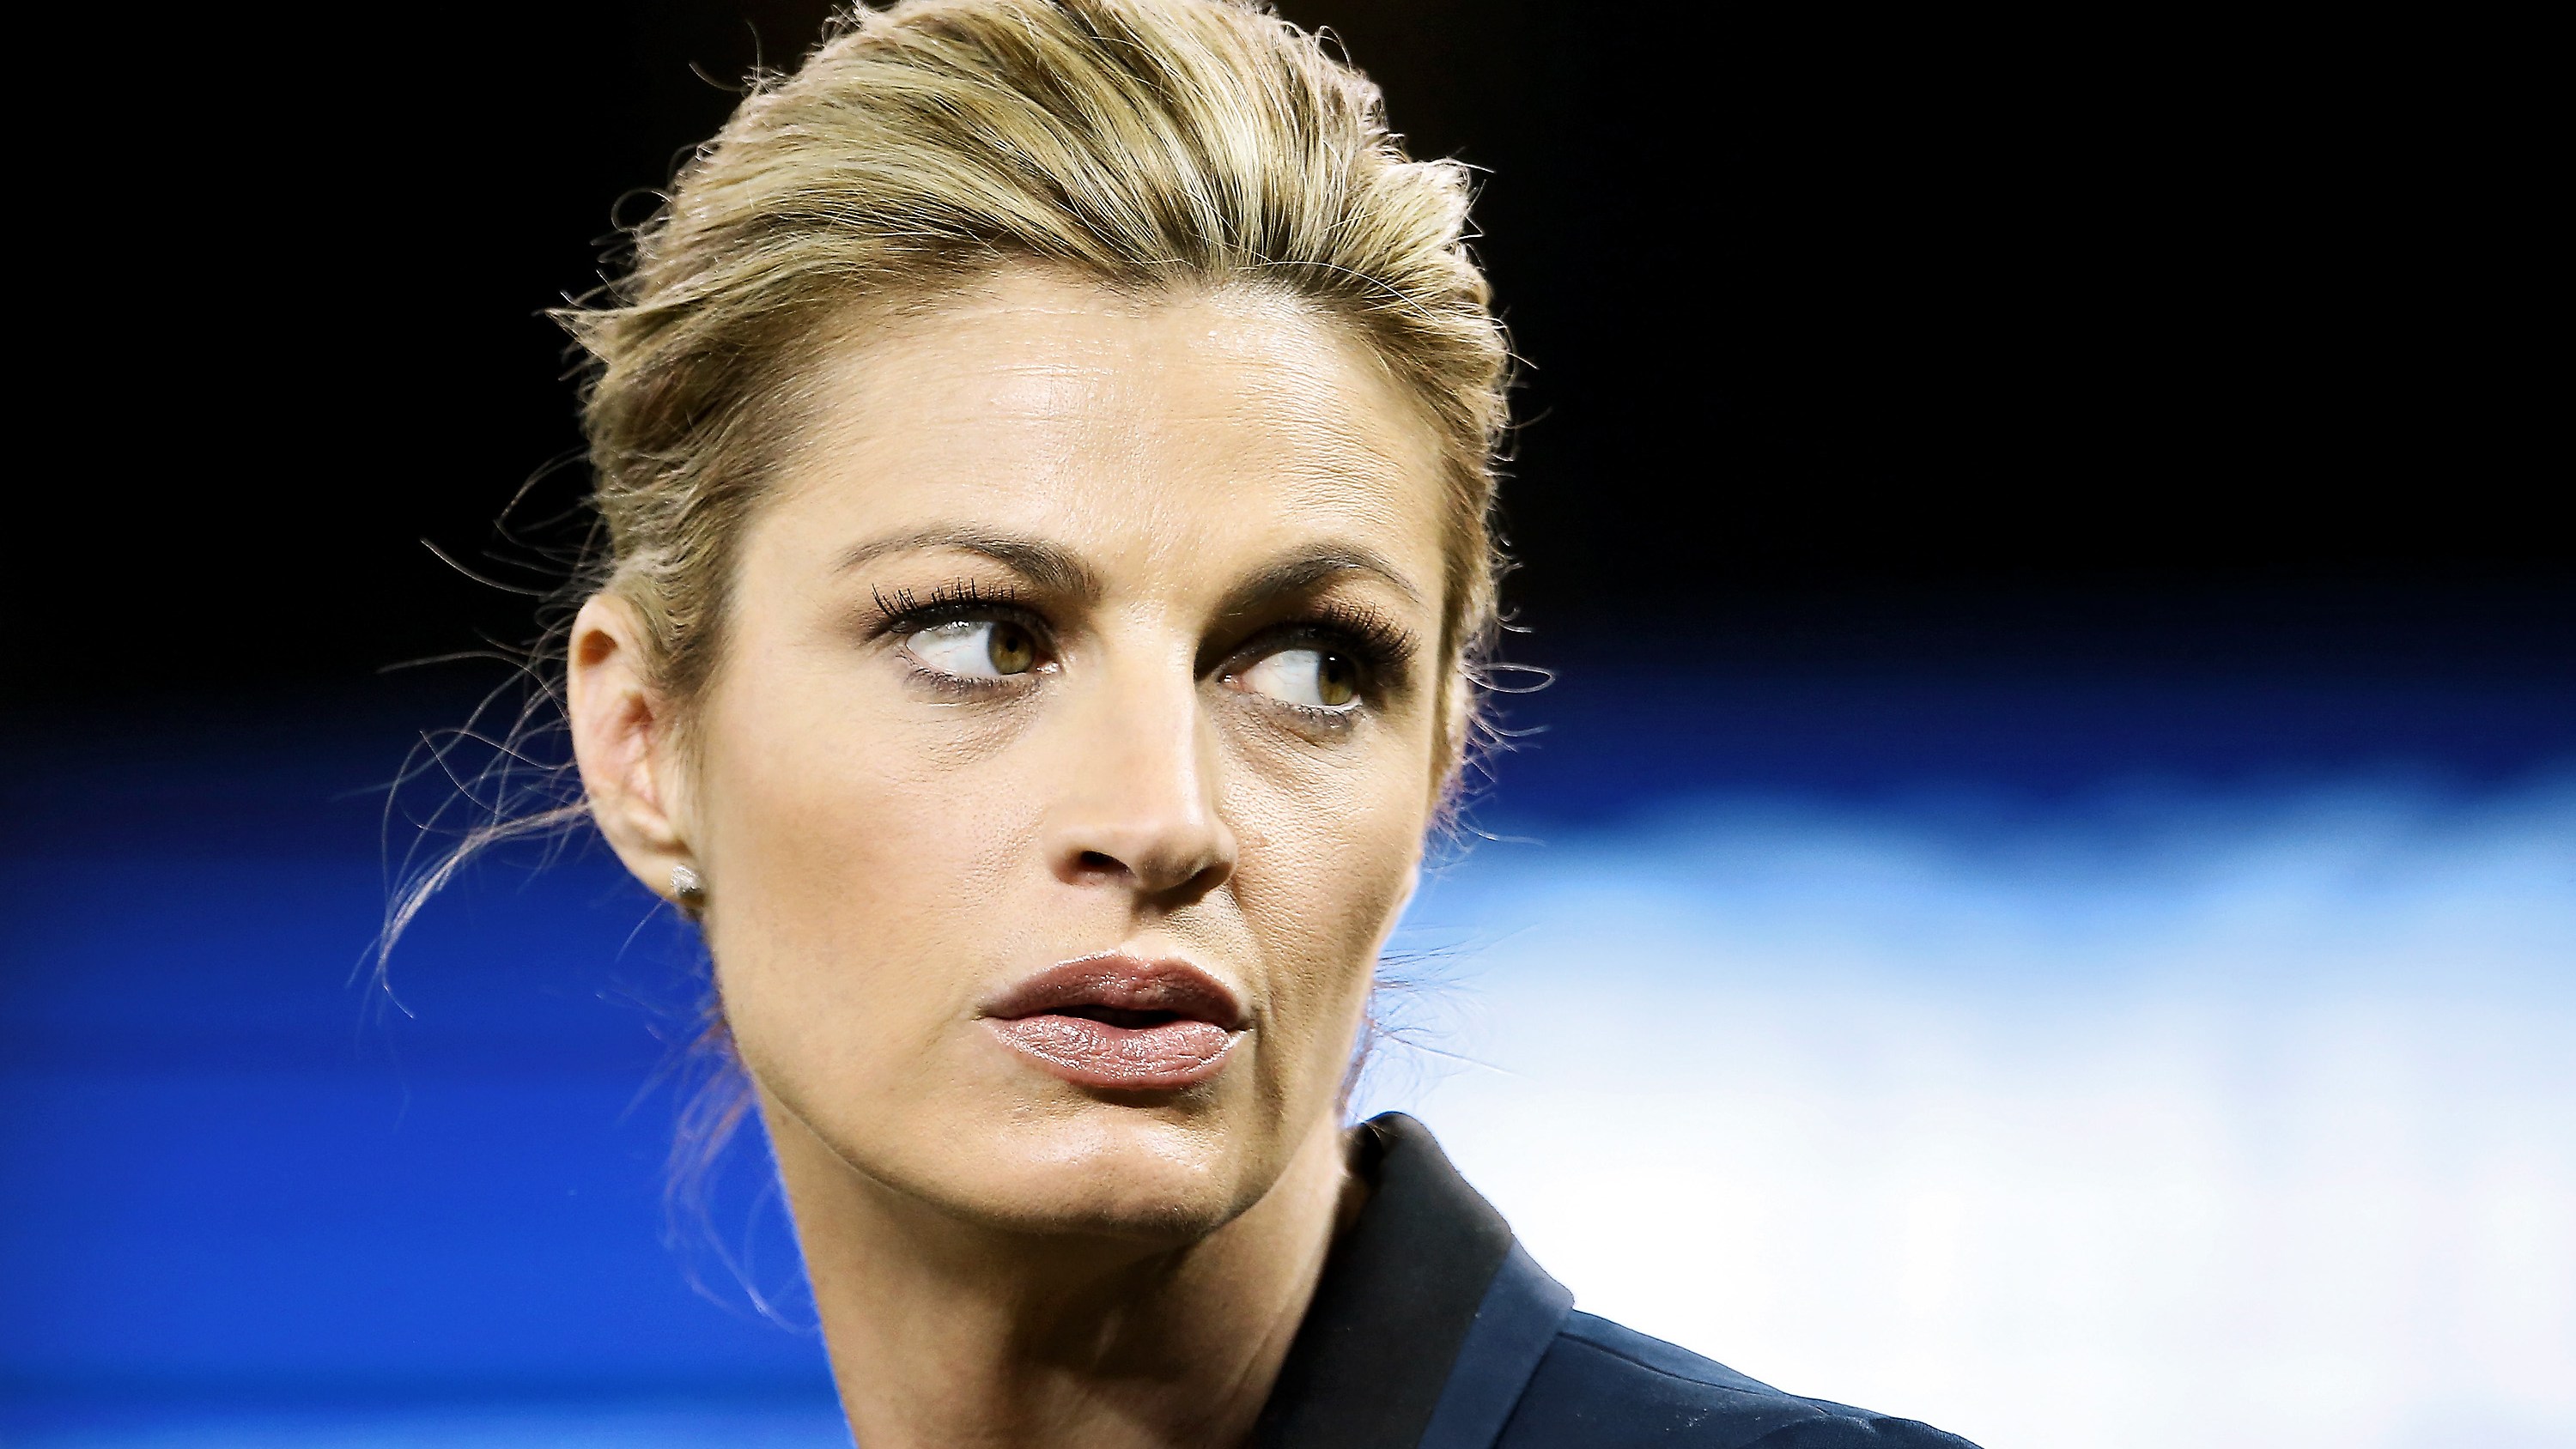 barnabus stinson recommends erin andrews hidden video pic